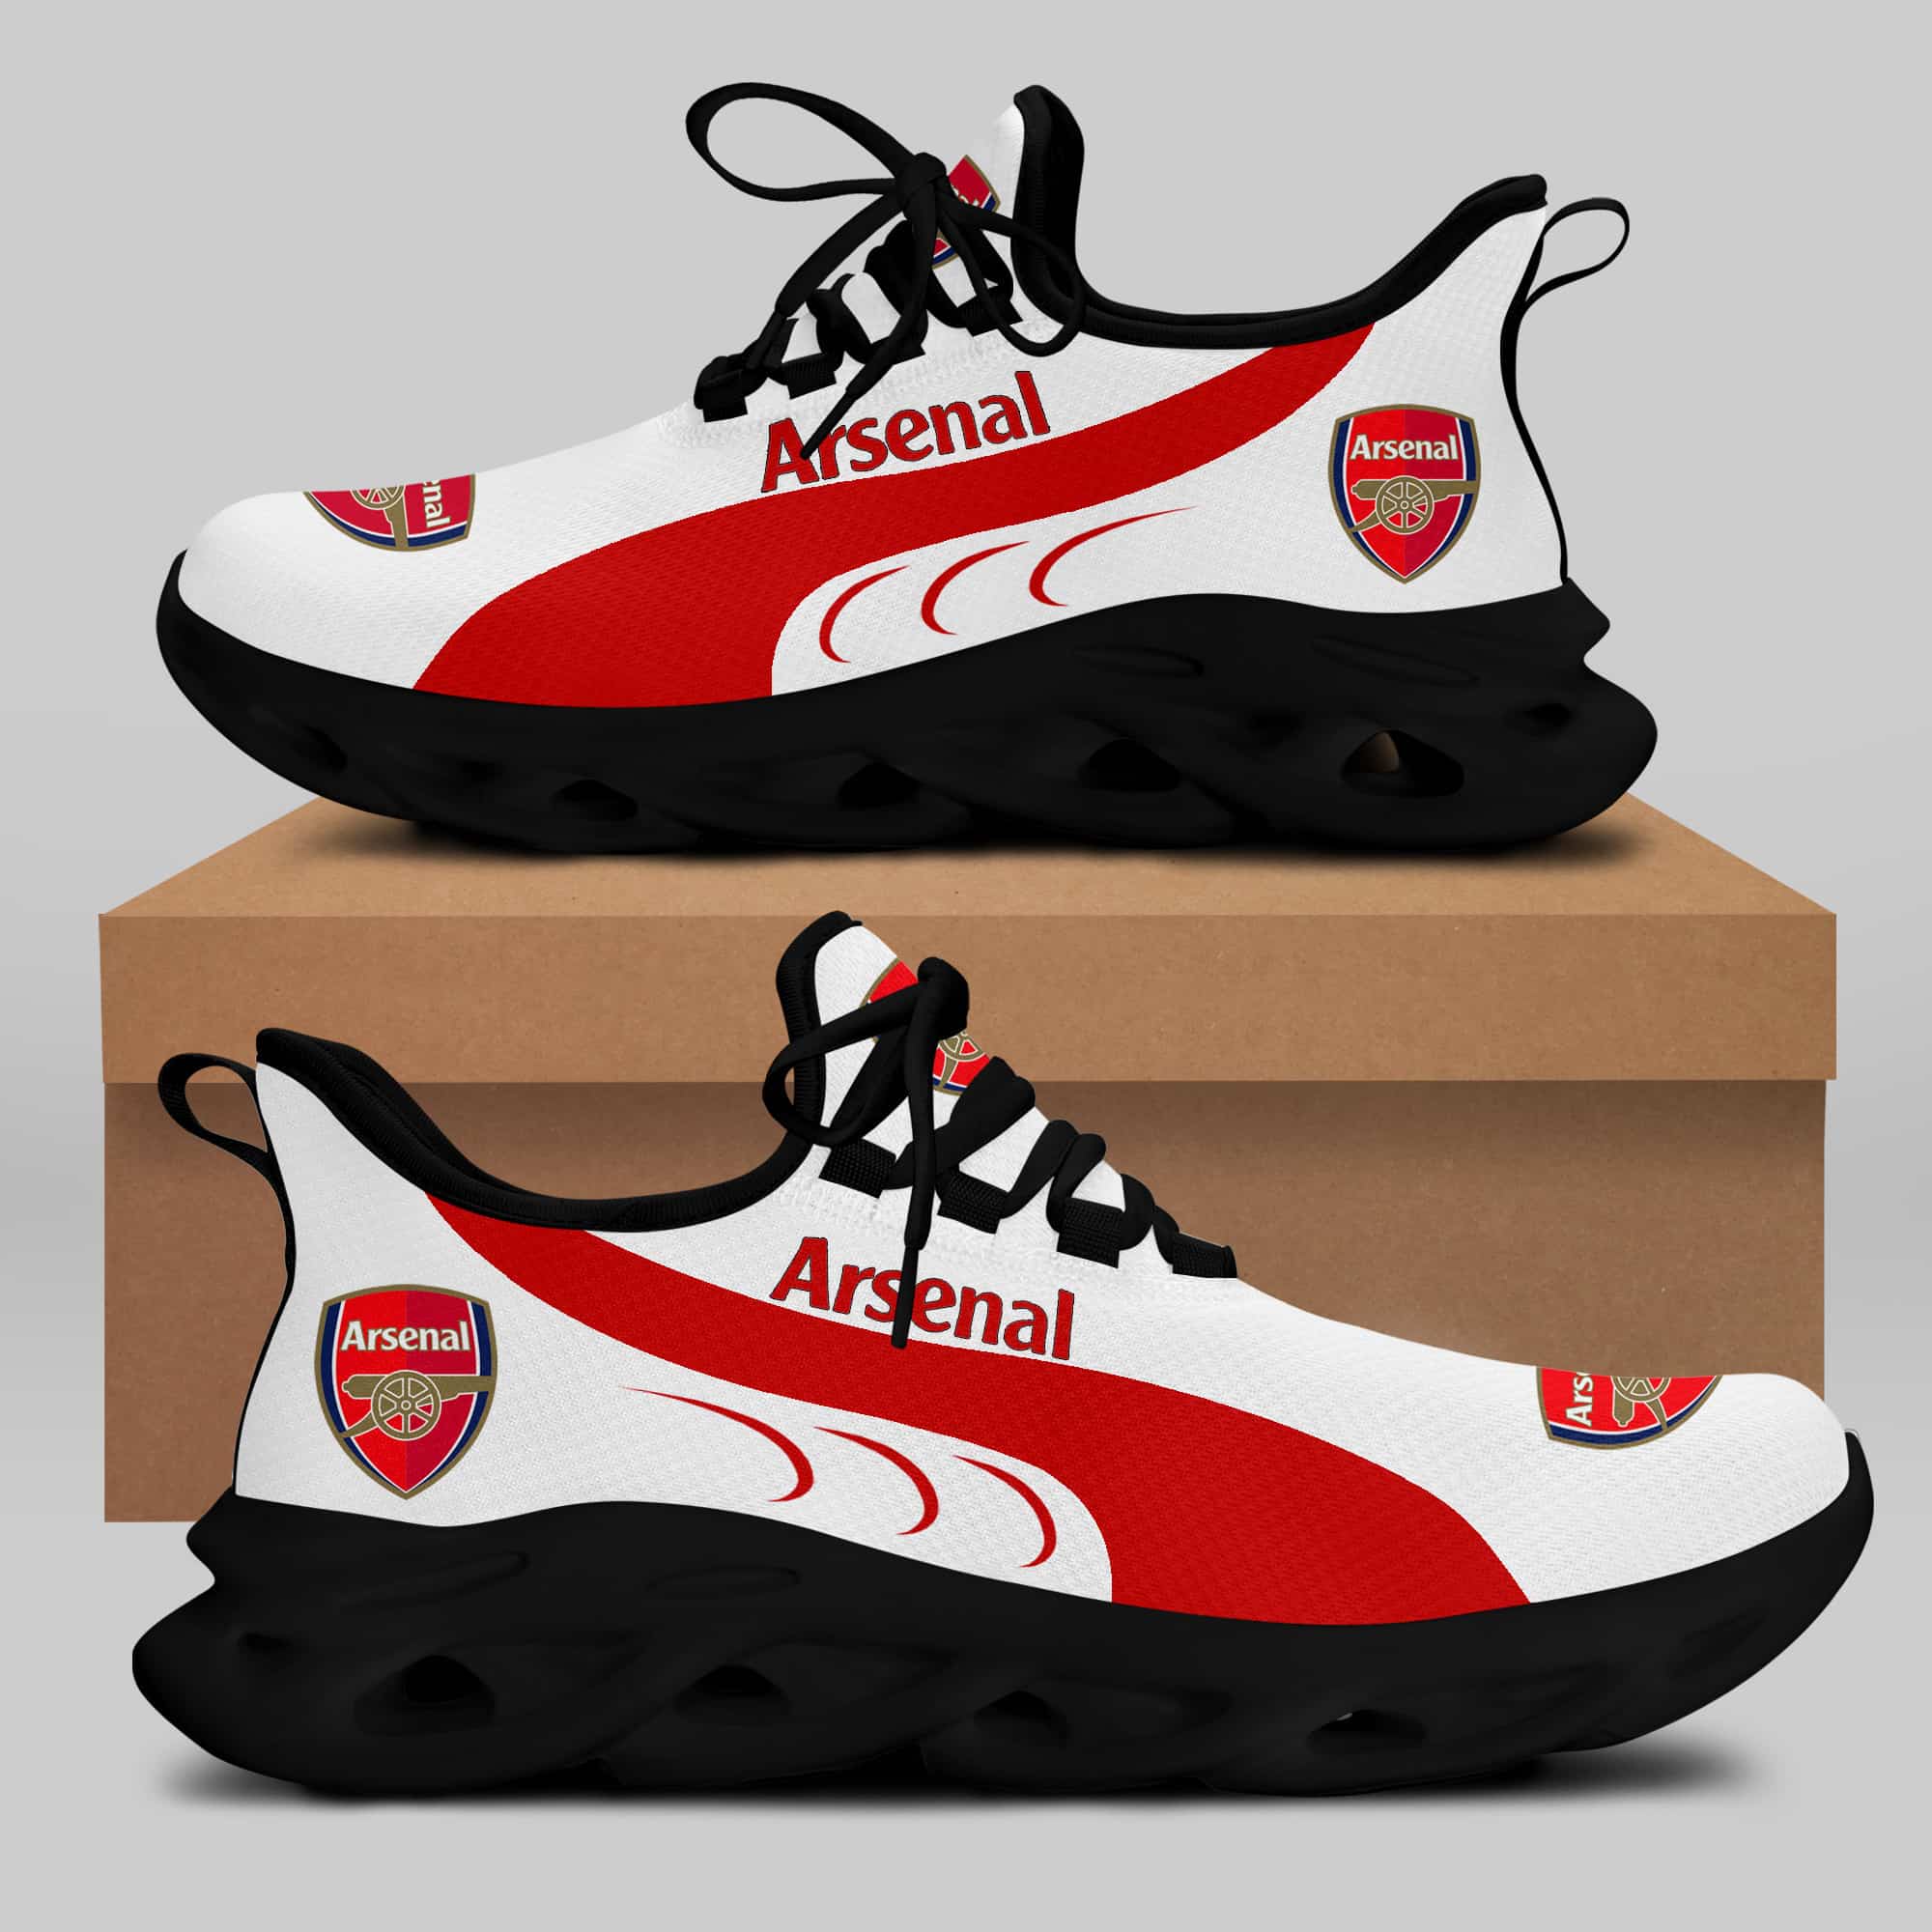 Arsenal Running Shoes Max Soul Shoes Sneakers Ver 2 2